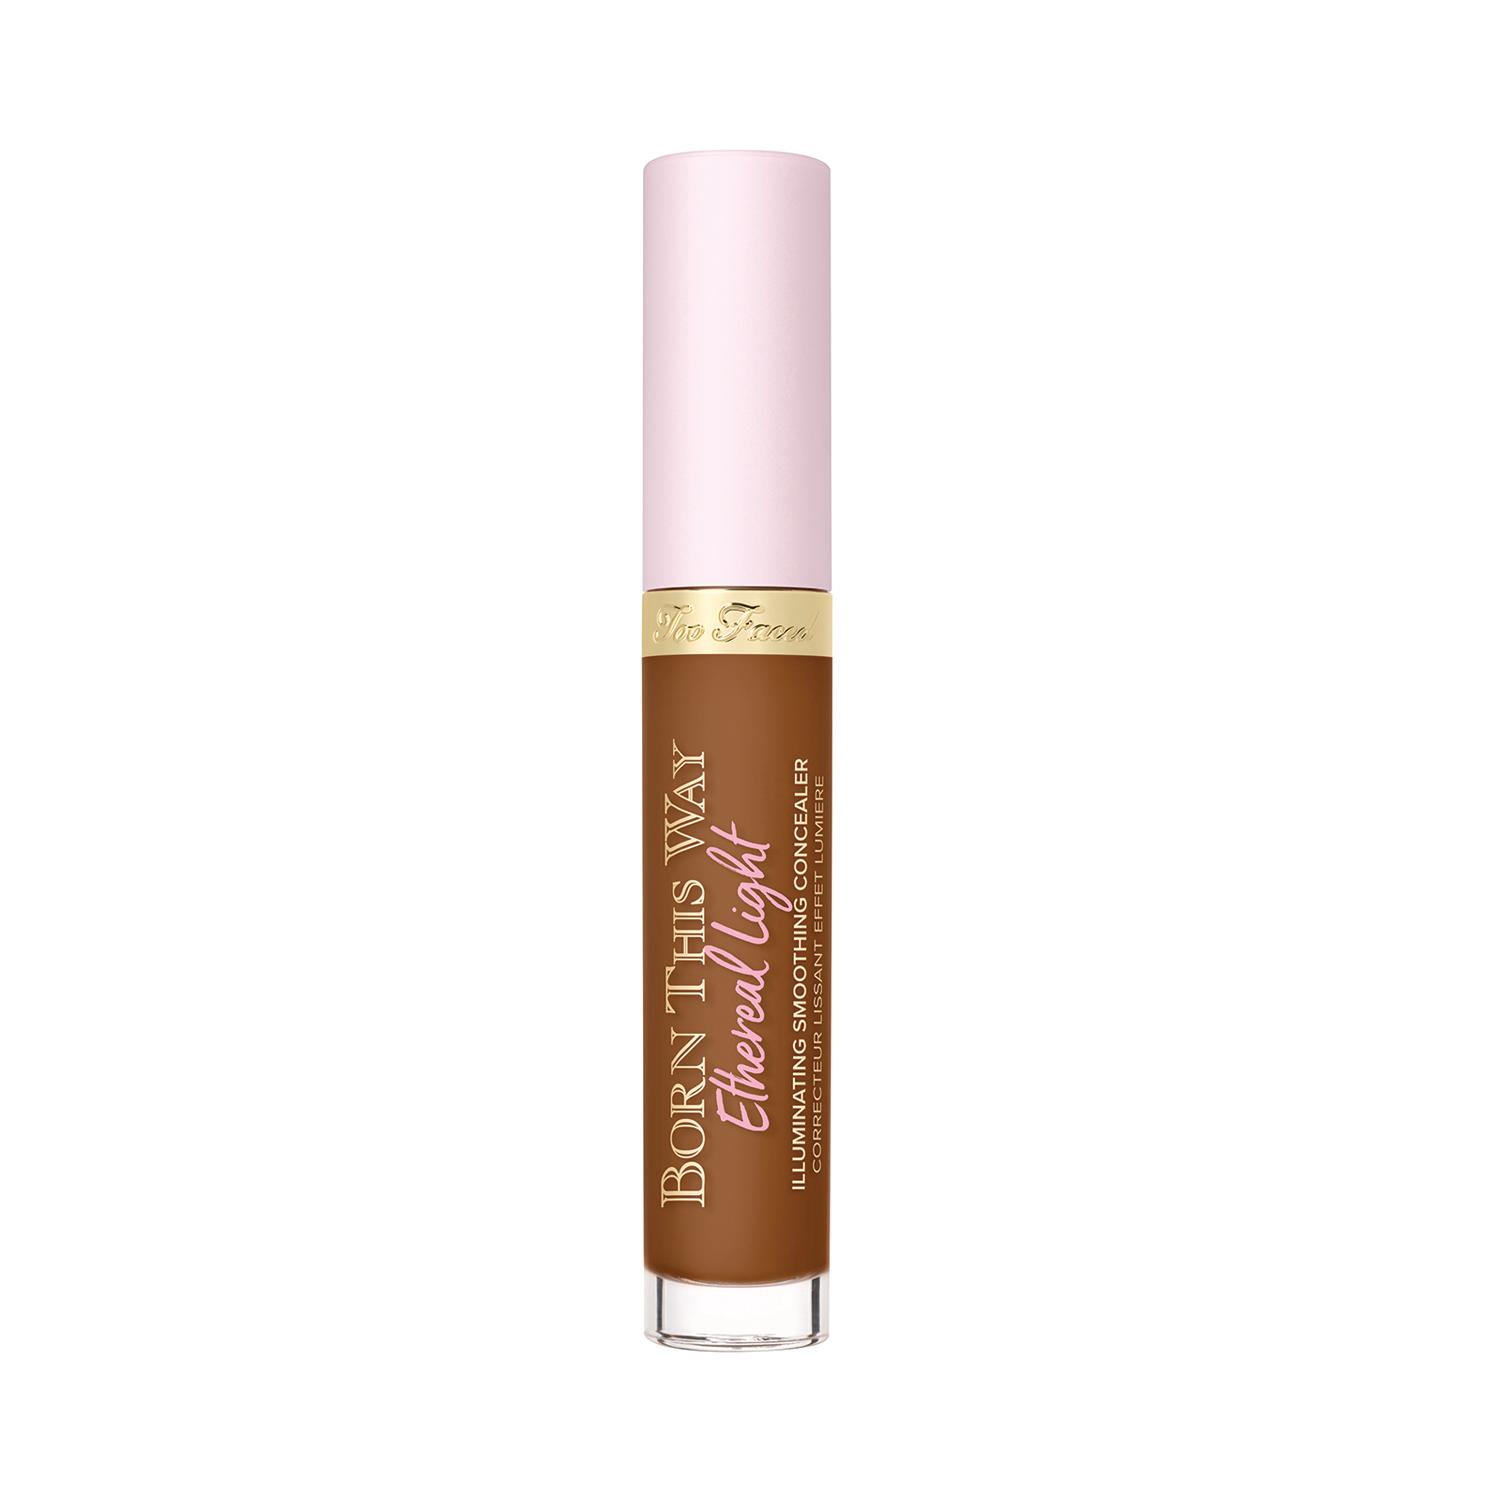 Too Faced | Too Faced Born This Way Illuminating Concealer - Hot Cocoa (5ml)